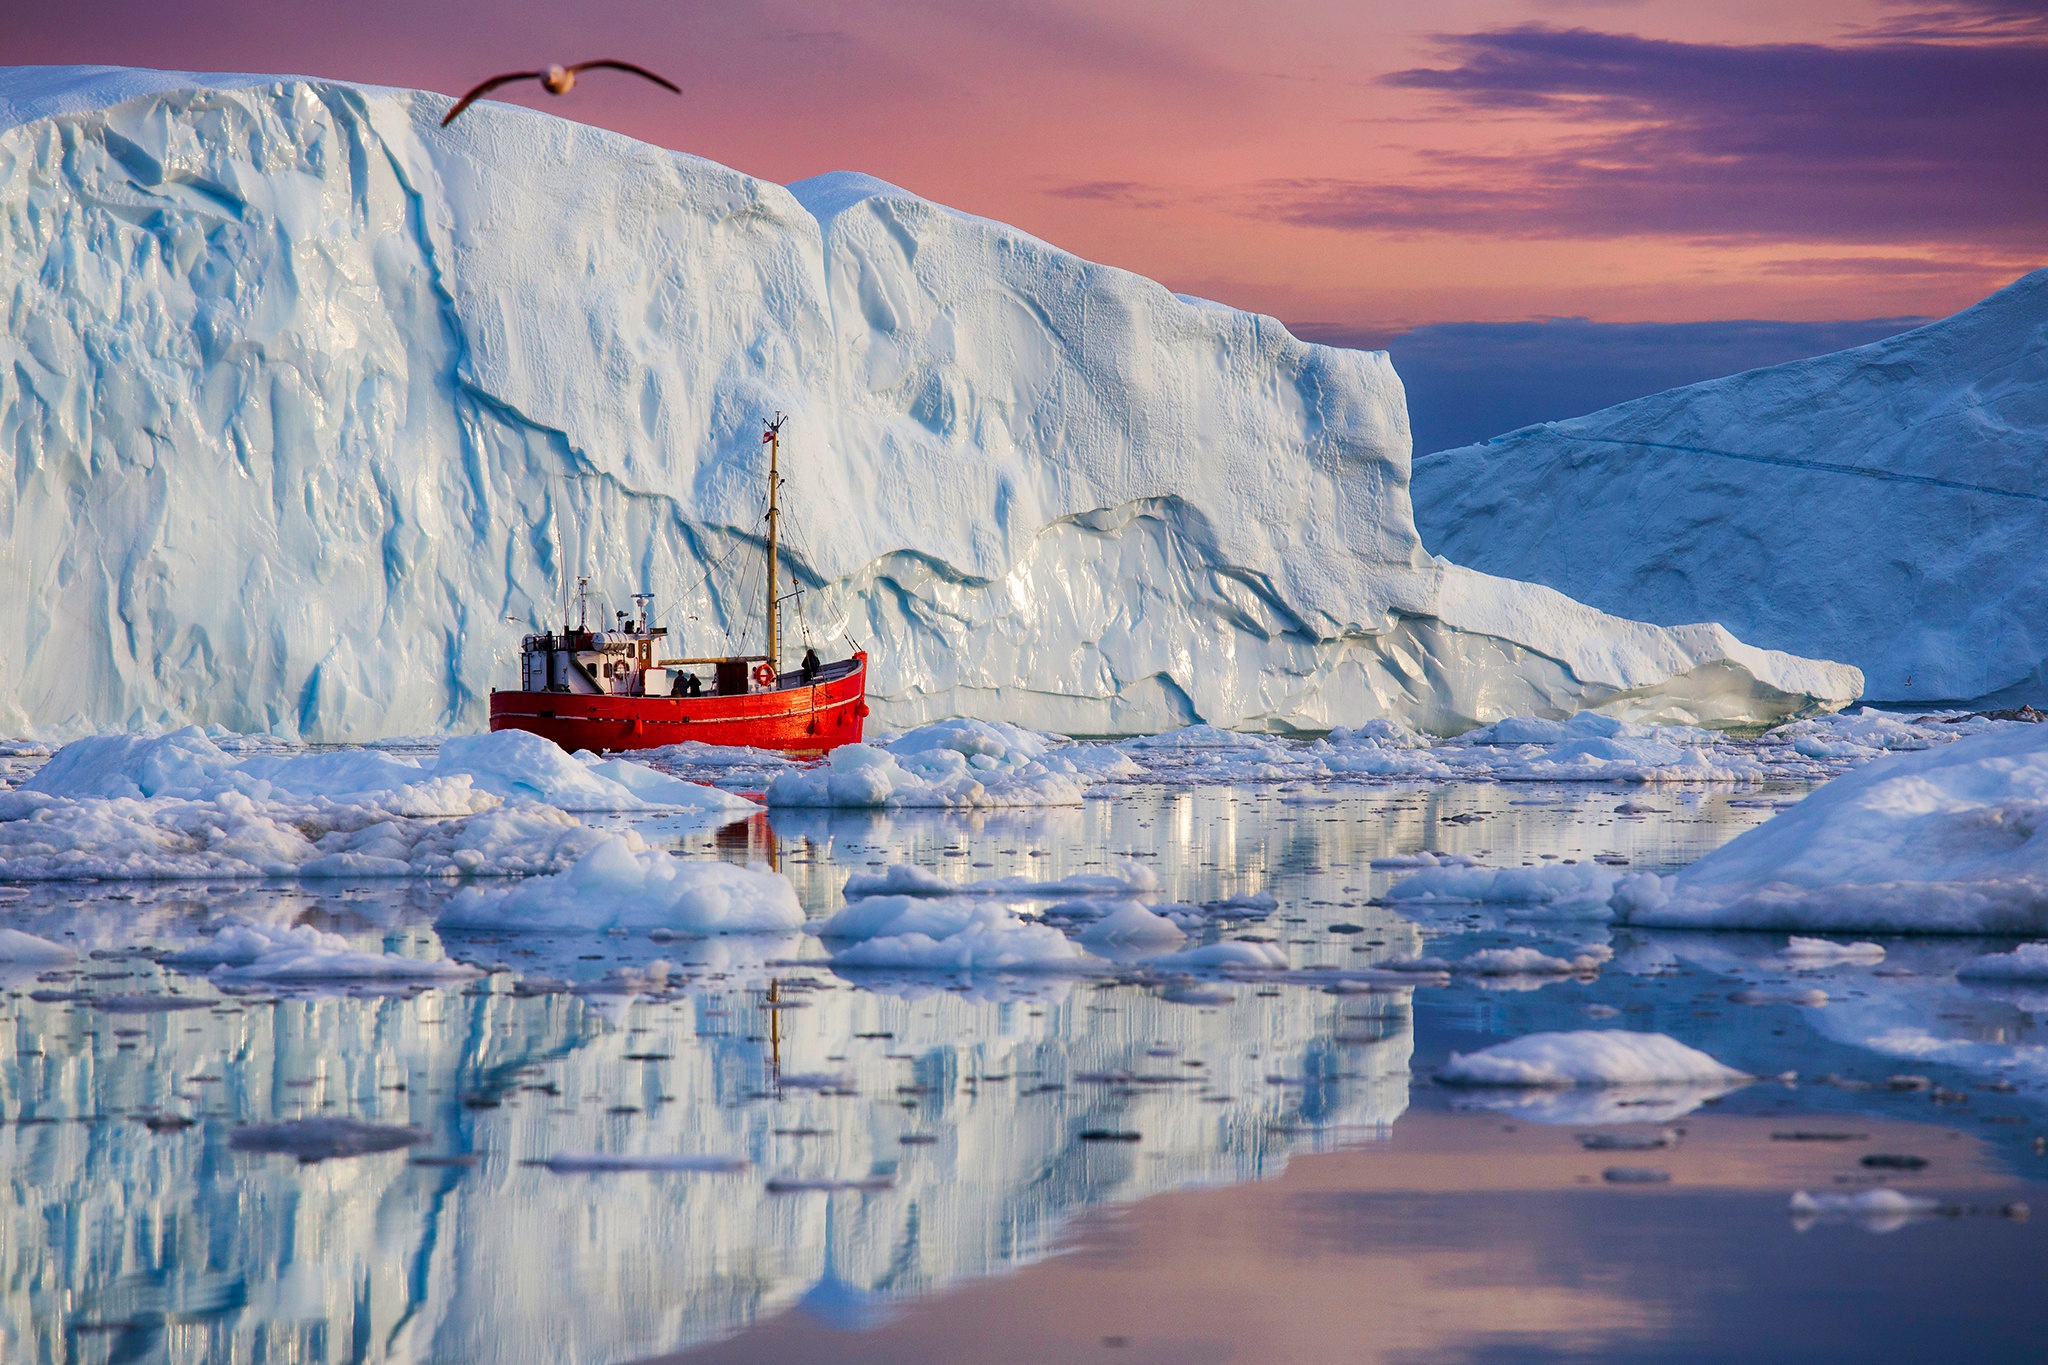 General 2048x1365 Greenland ice reflection nature sea vehicle boat